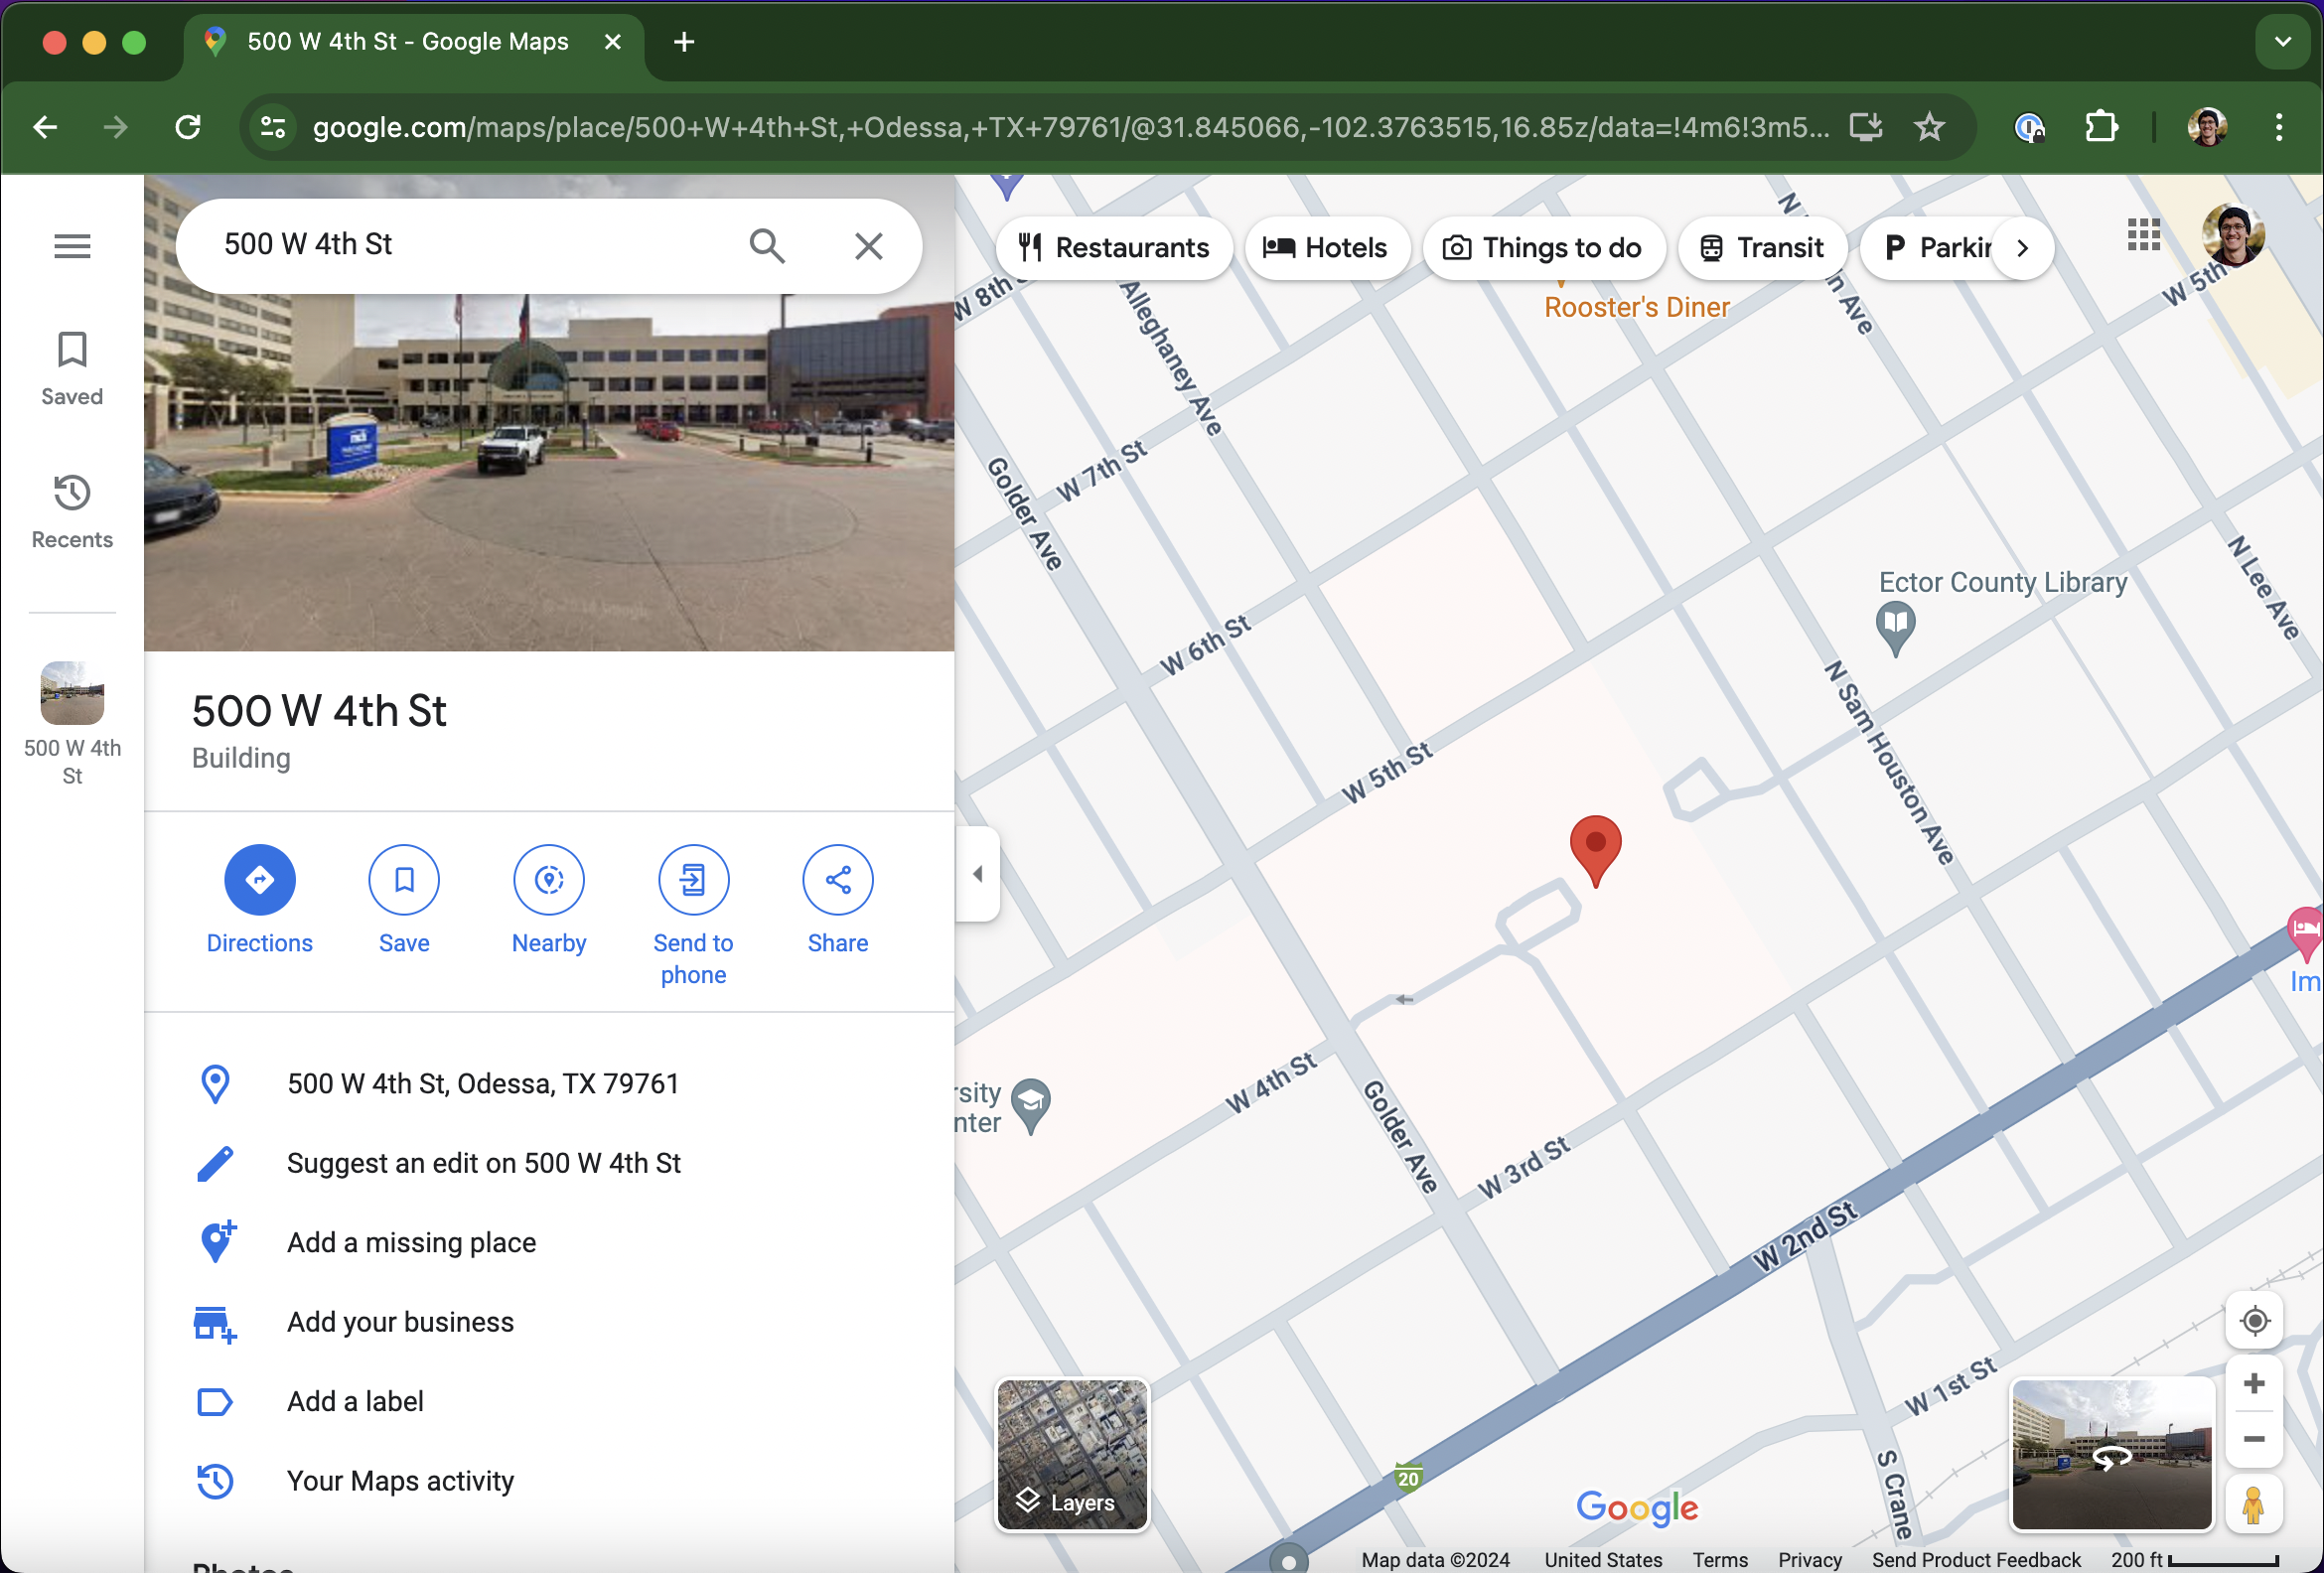 An OSX screenshot of a Google Maps tab in the iOS Chrome browser. The address "500 W 4th St" is pinned.